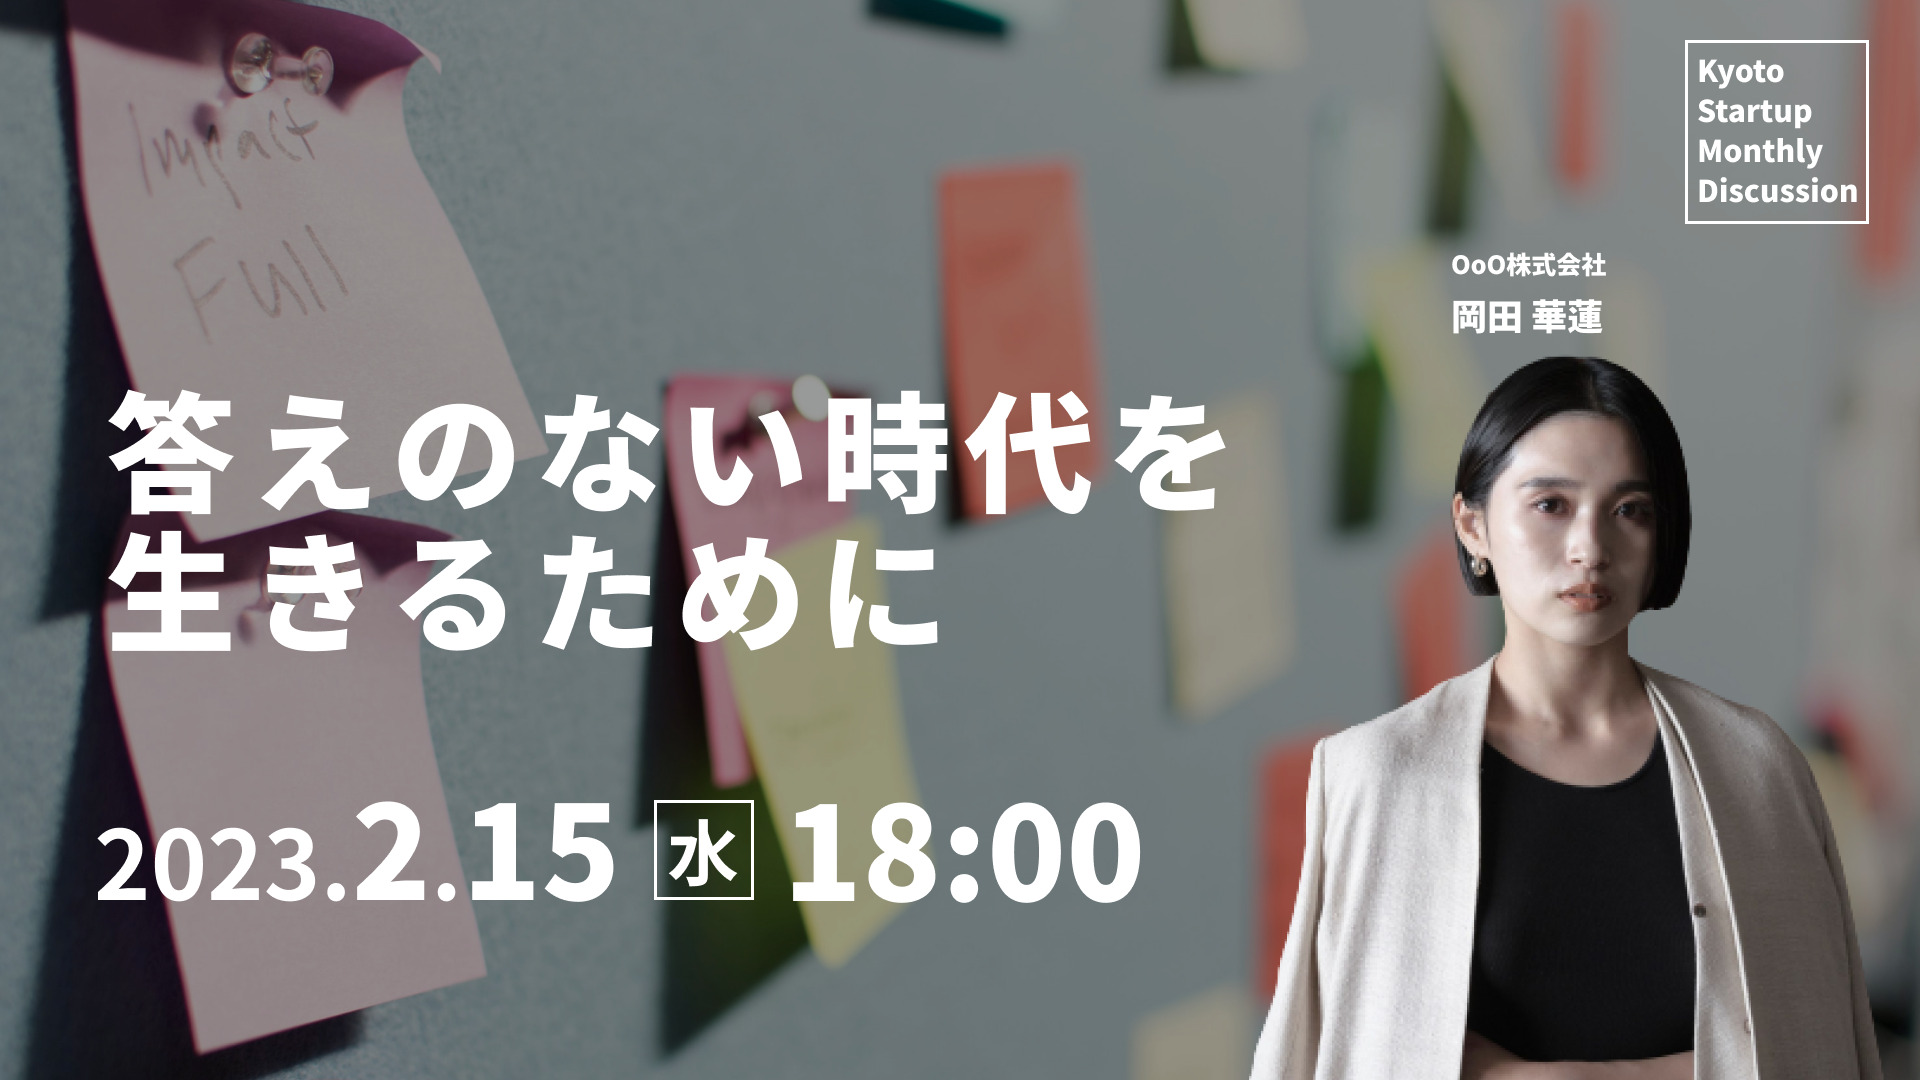 Kyoto Startup Monthly Discussion #21レポート(2023/2/15開催）